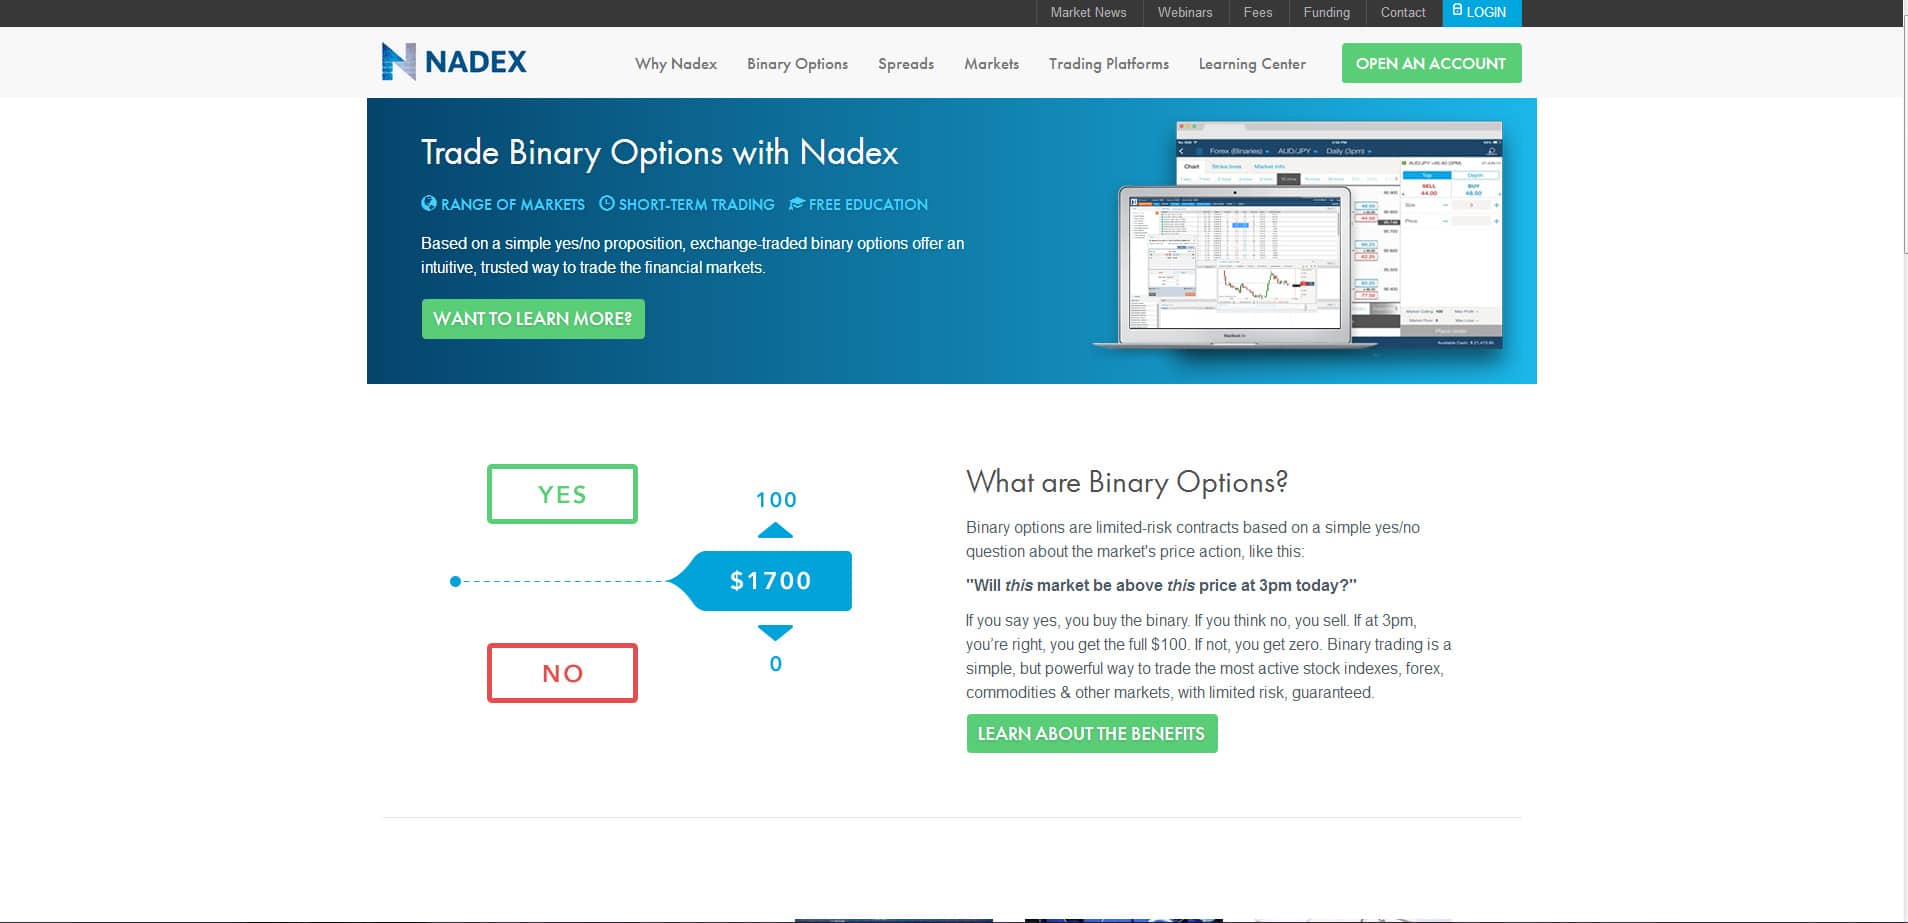 Binary options brokers safe for us nadex cantor exchange